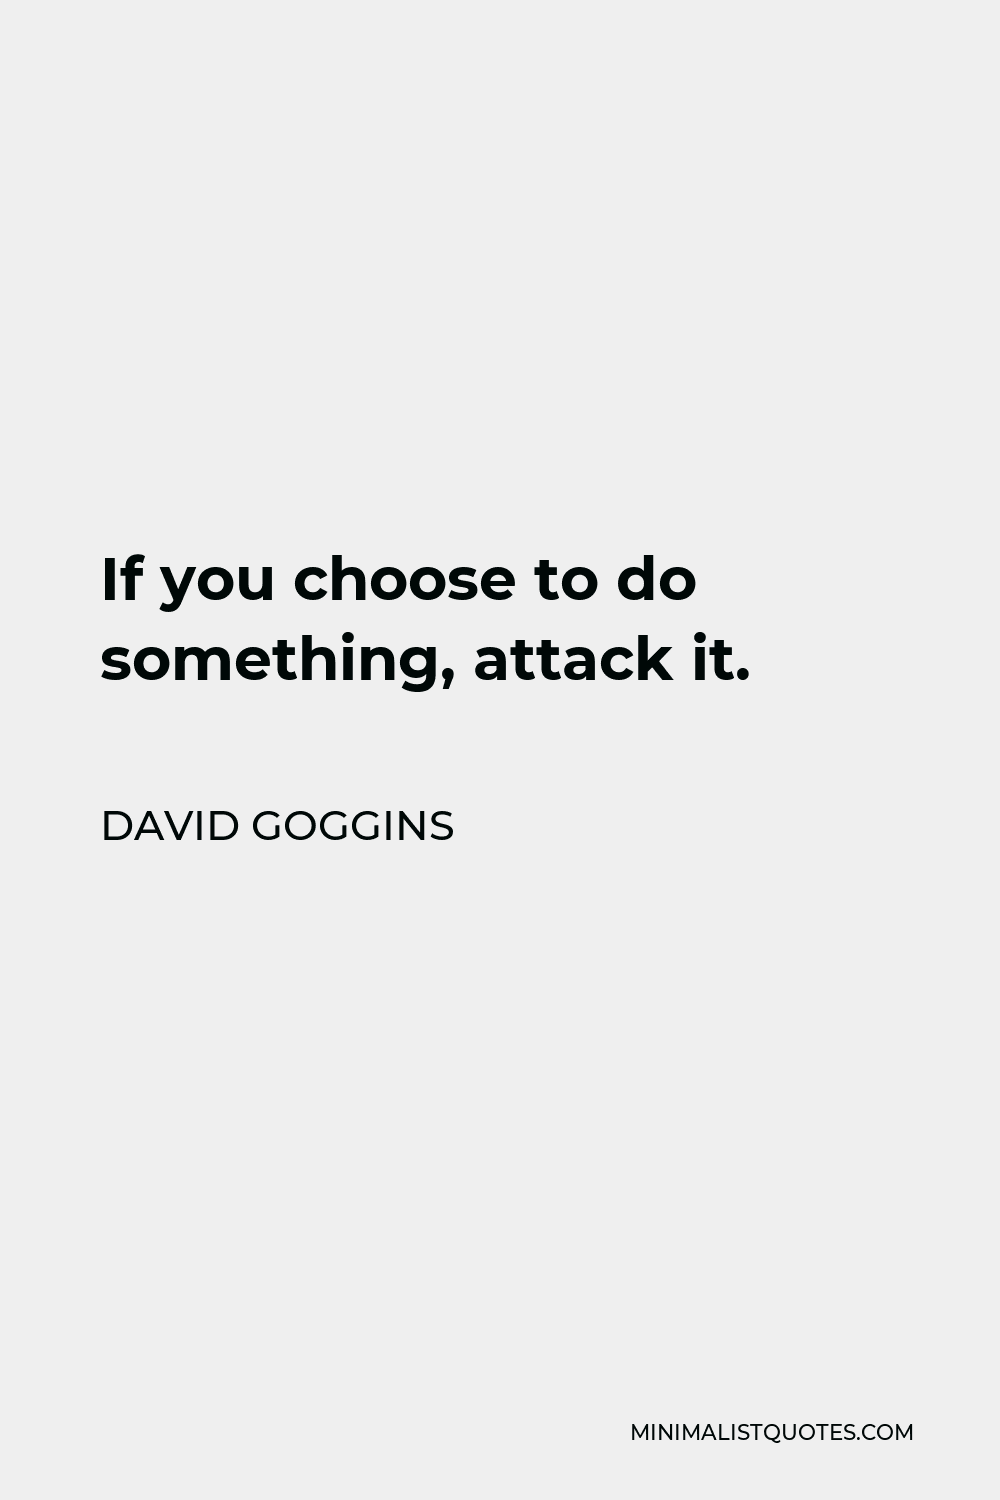 David Goggins Quote - If you choose to do something, attack it.